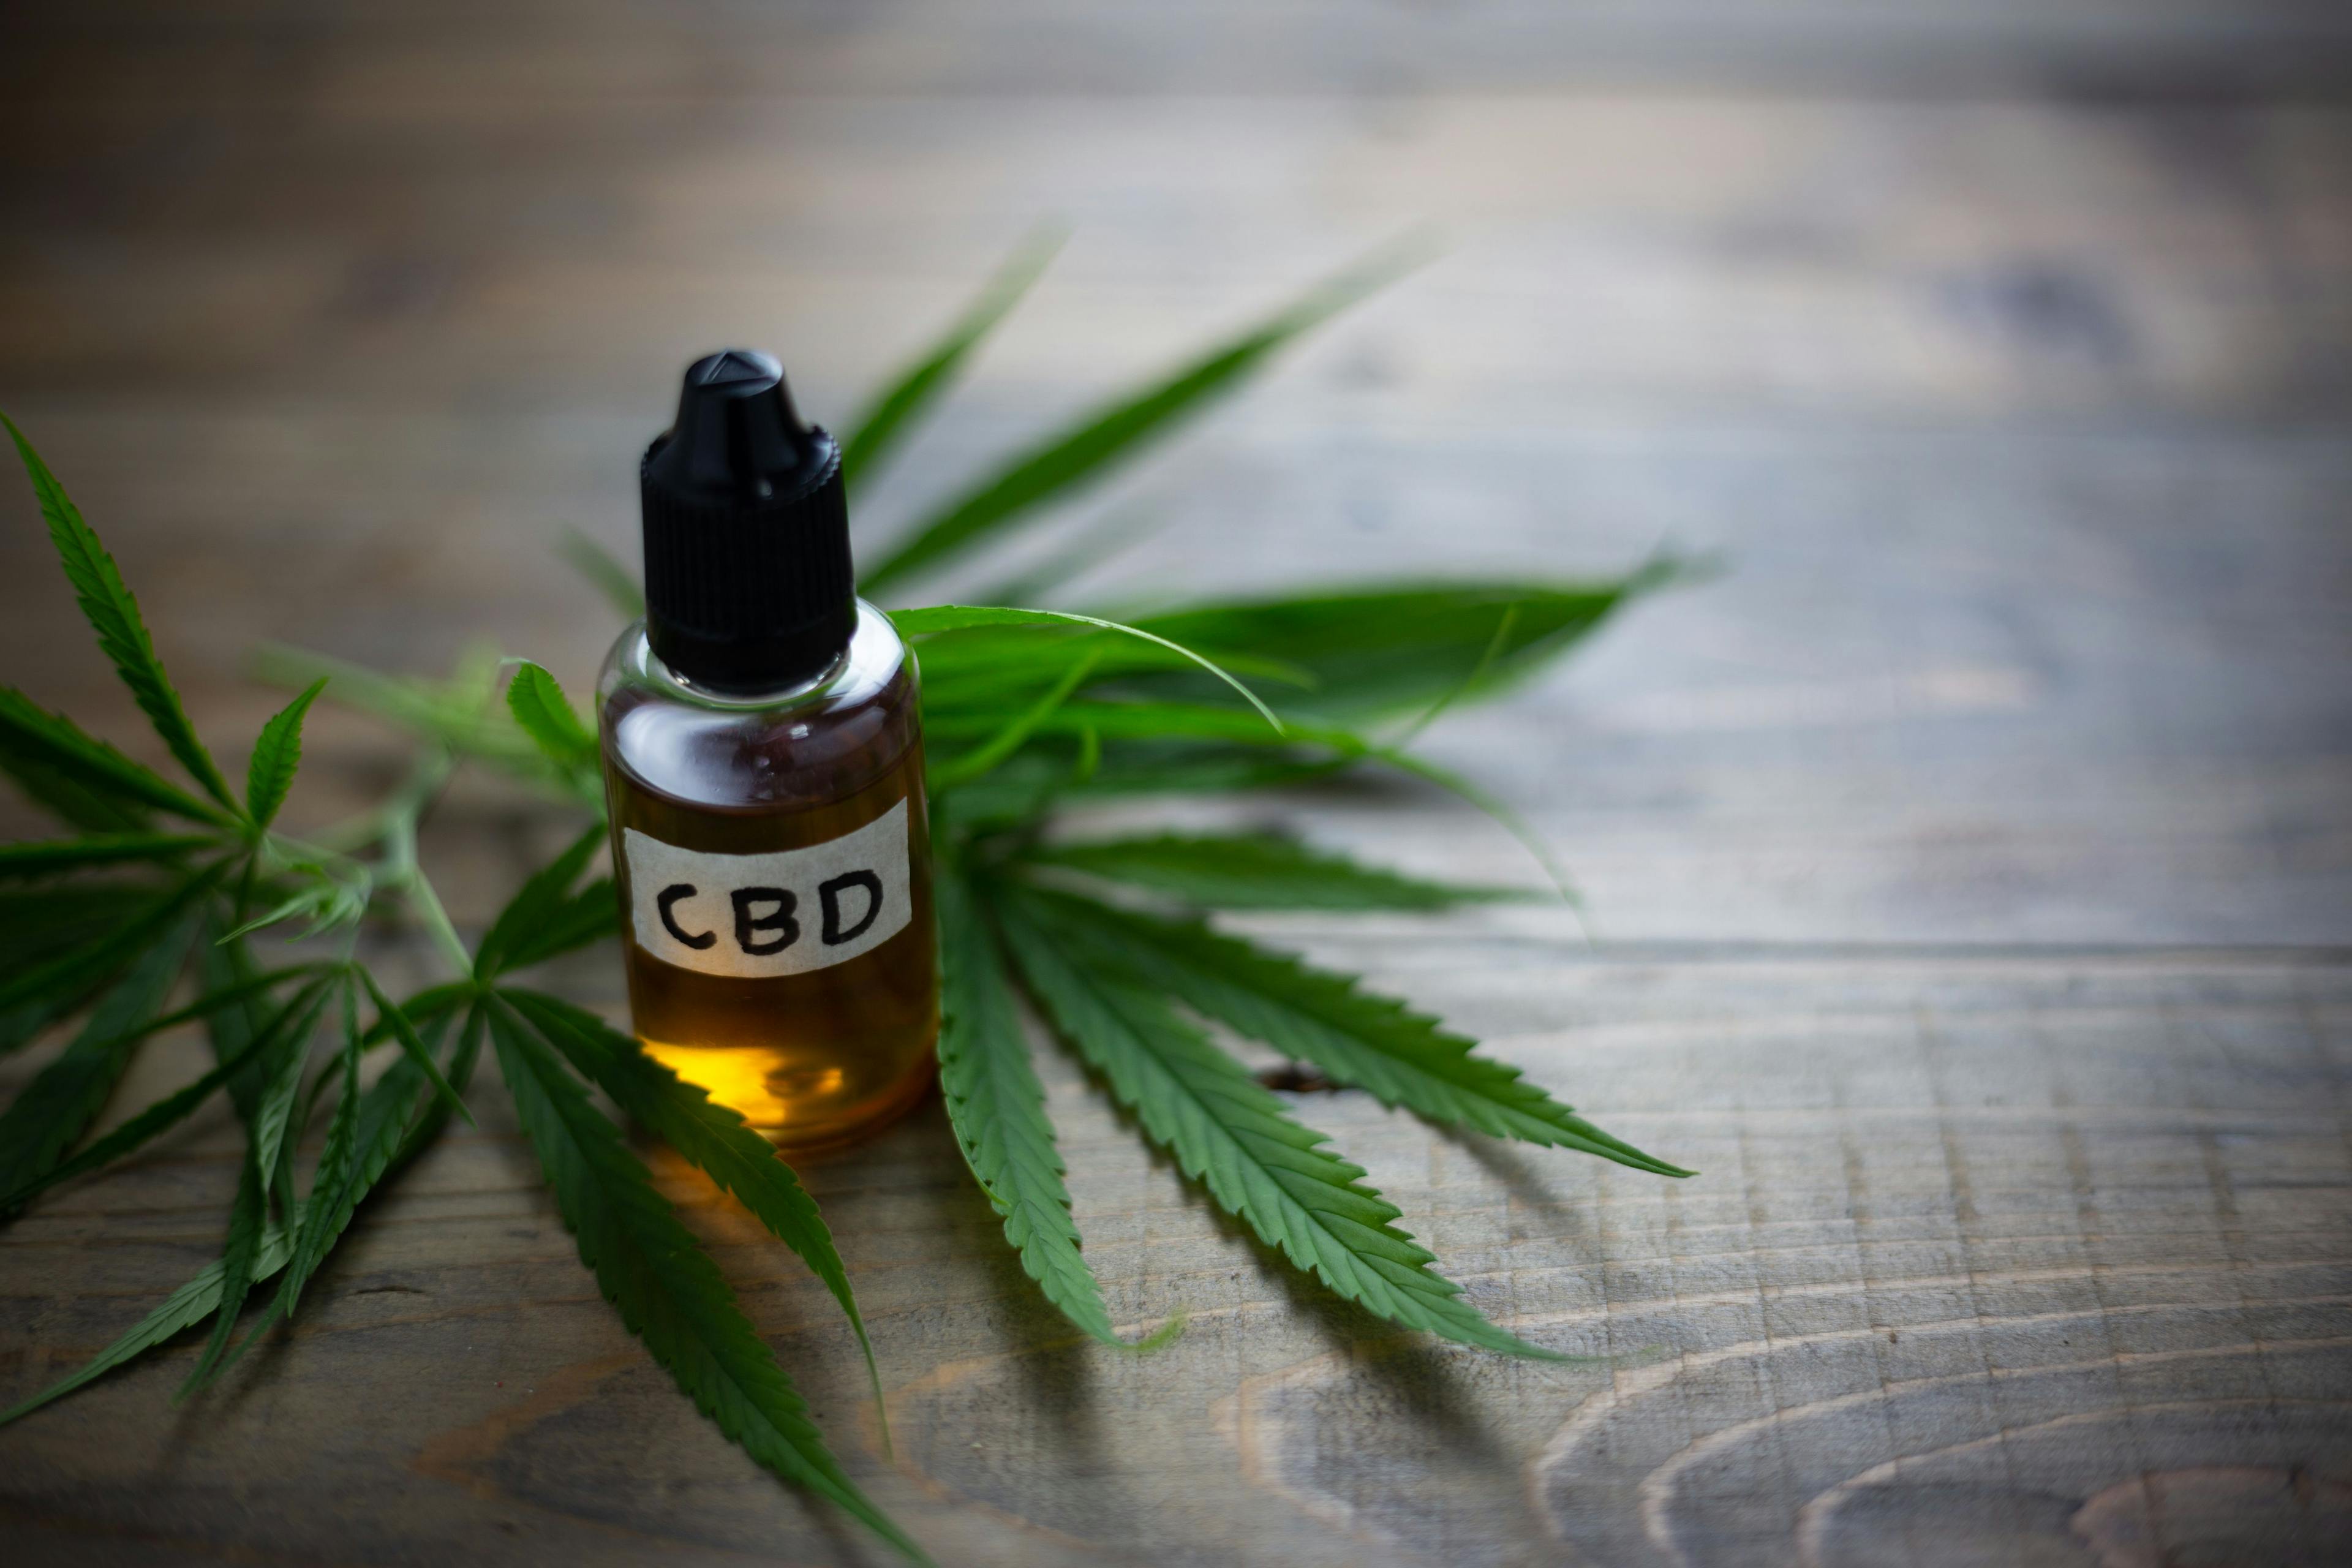 Research Indicates Clinical Trials Are Needed to Determine CBD Benefits for Heart Disease